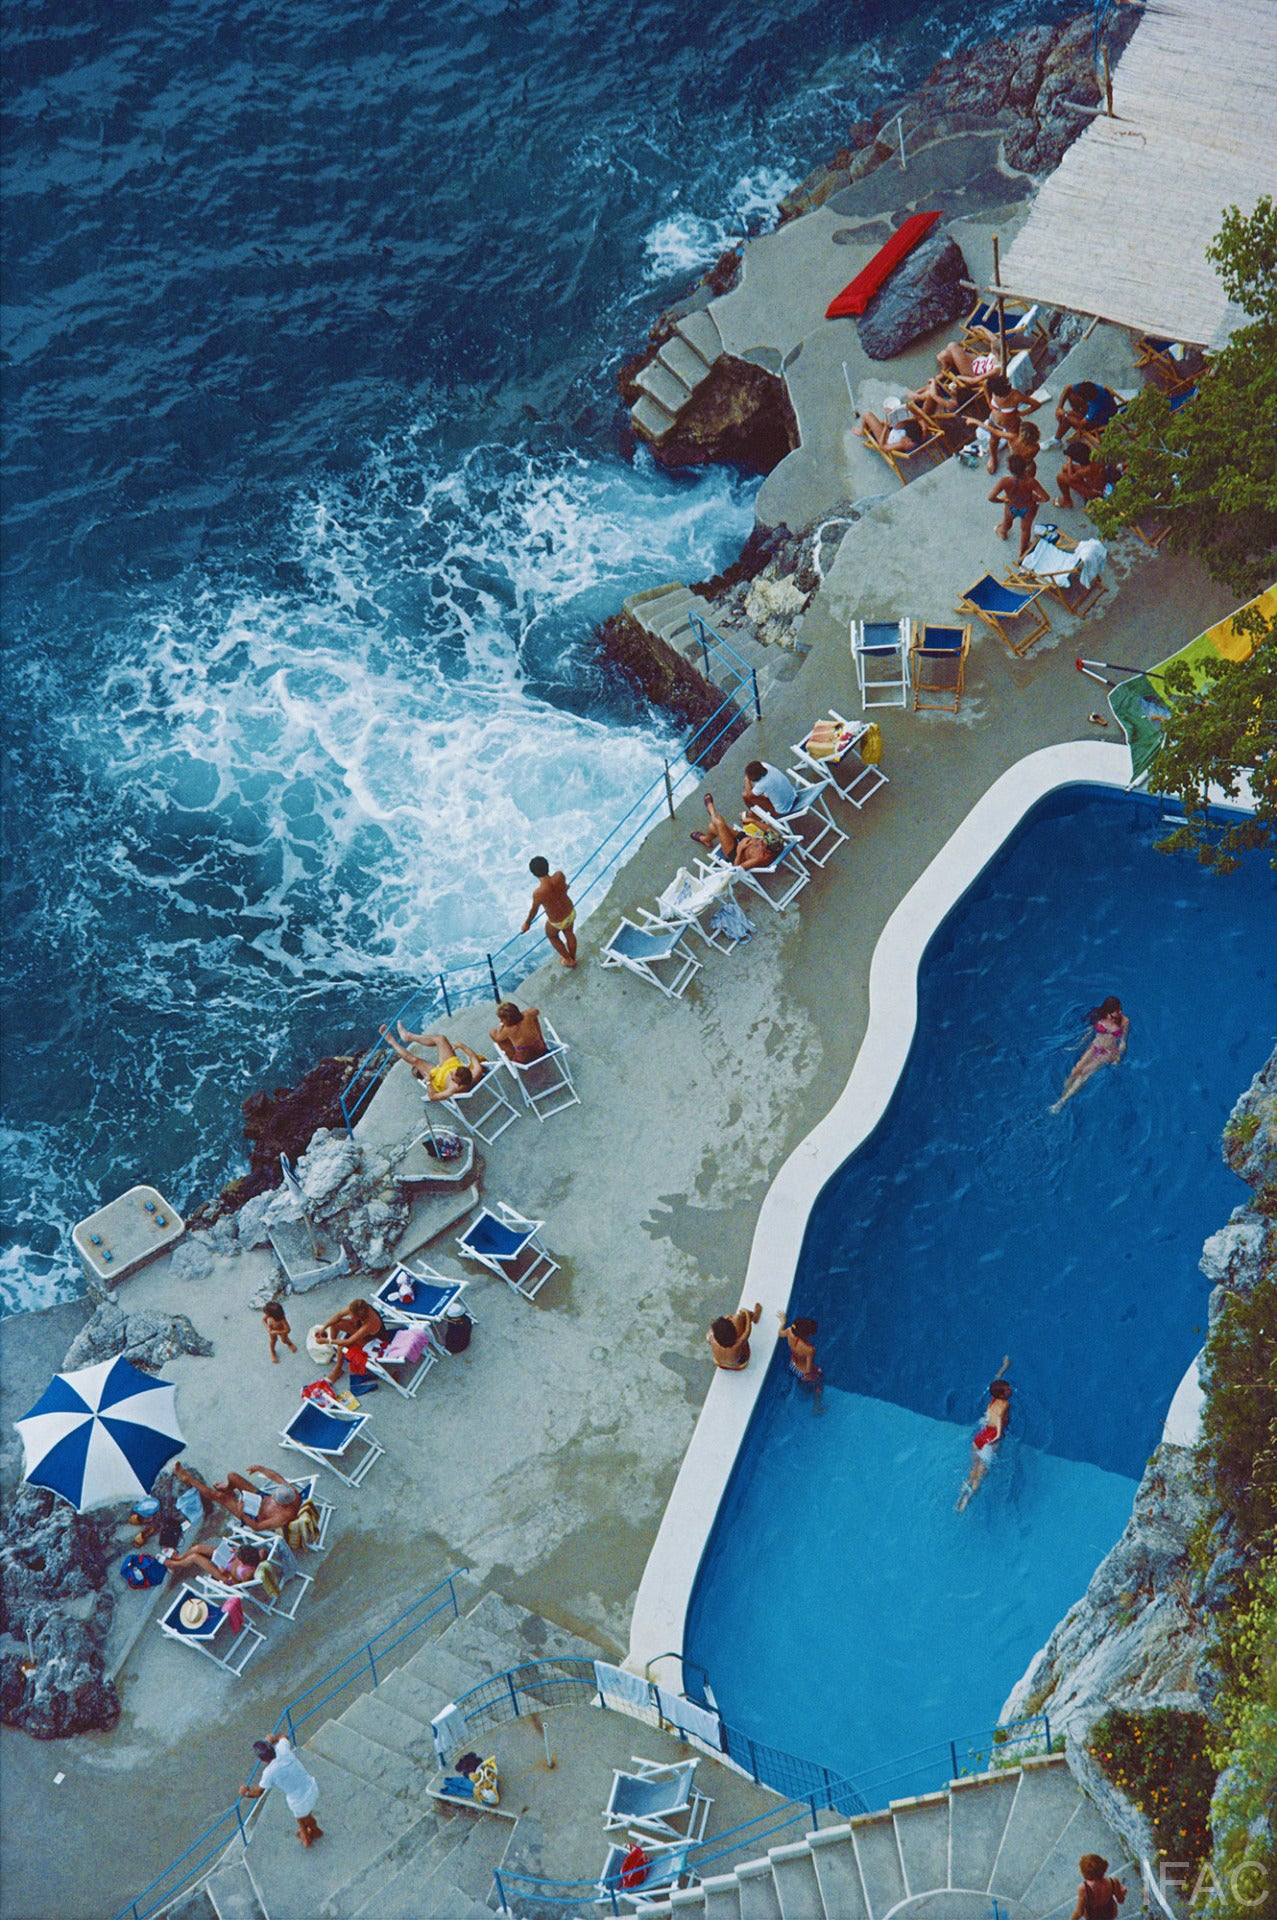 A view of the seaside pool at the Hotel St. Caterina, Amalfi, Italy, September 1984.

Estate stamped and hand numbered edition of 150 with certificate of authenticity from the Slim Aarons Estate. 

Slim Aarons (1916-2006) worked mainly for